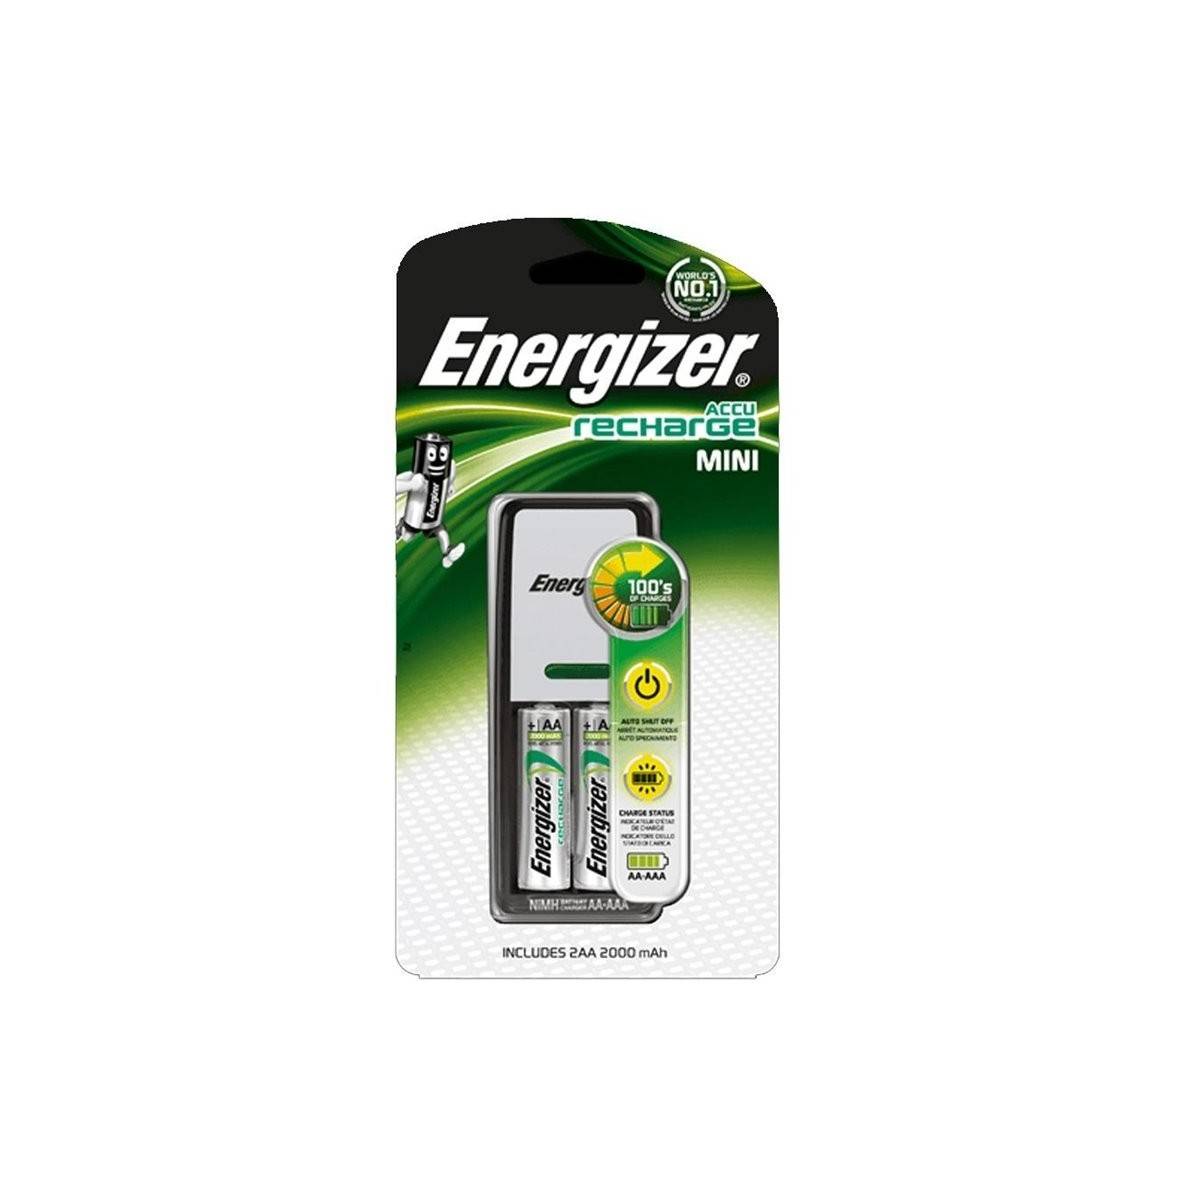 Energizer Battery Charger 2 HR03 (AAA) 700mAh with 2 batteries included